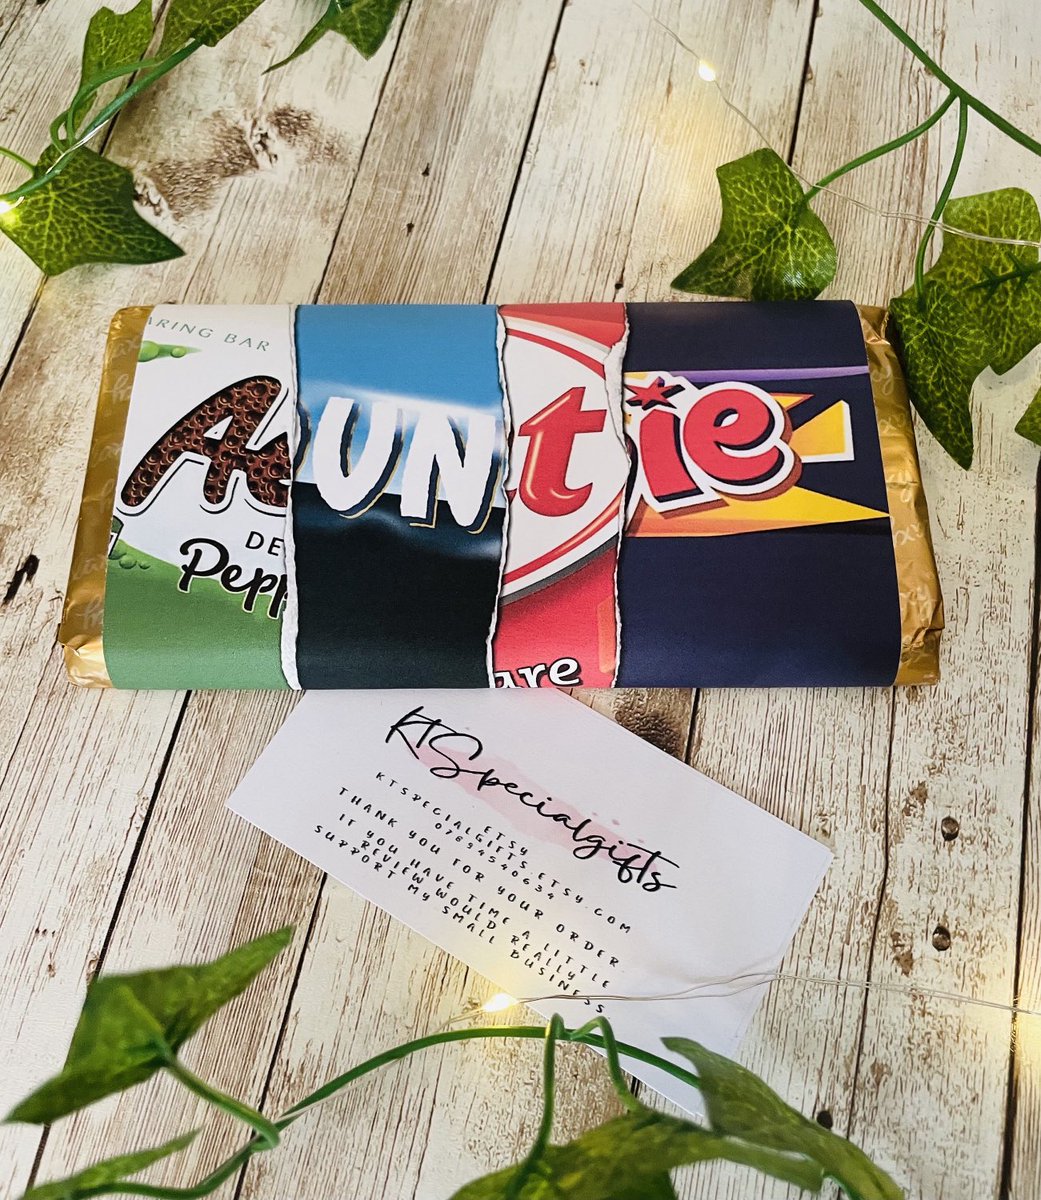 Lovely Auntie gift. Personalised and perfect for any occasion. 

ktspecialgifts.etsy.com/listing/170688…

#auntie #auntiegift #birthday #personalised #giftforher #ukgiftam #bestaunty #auntygift #chocolate